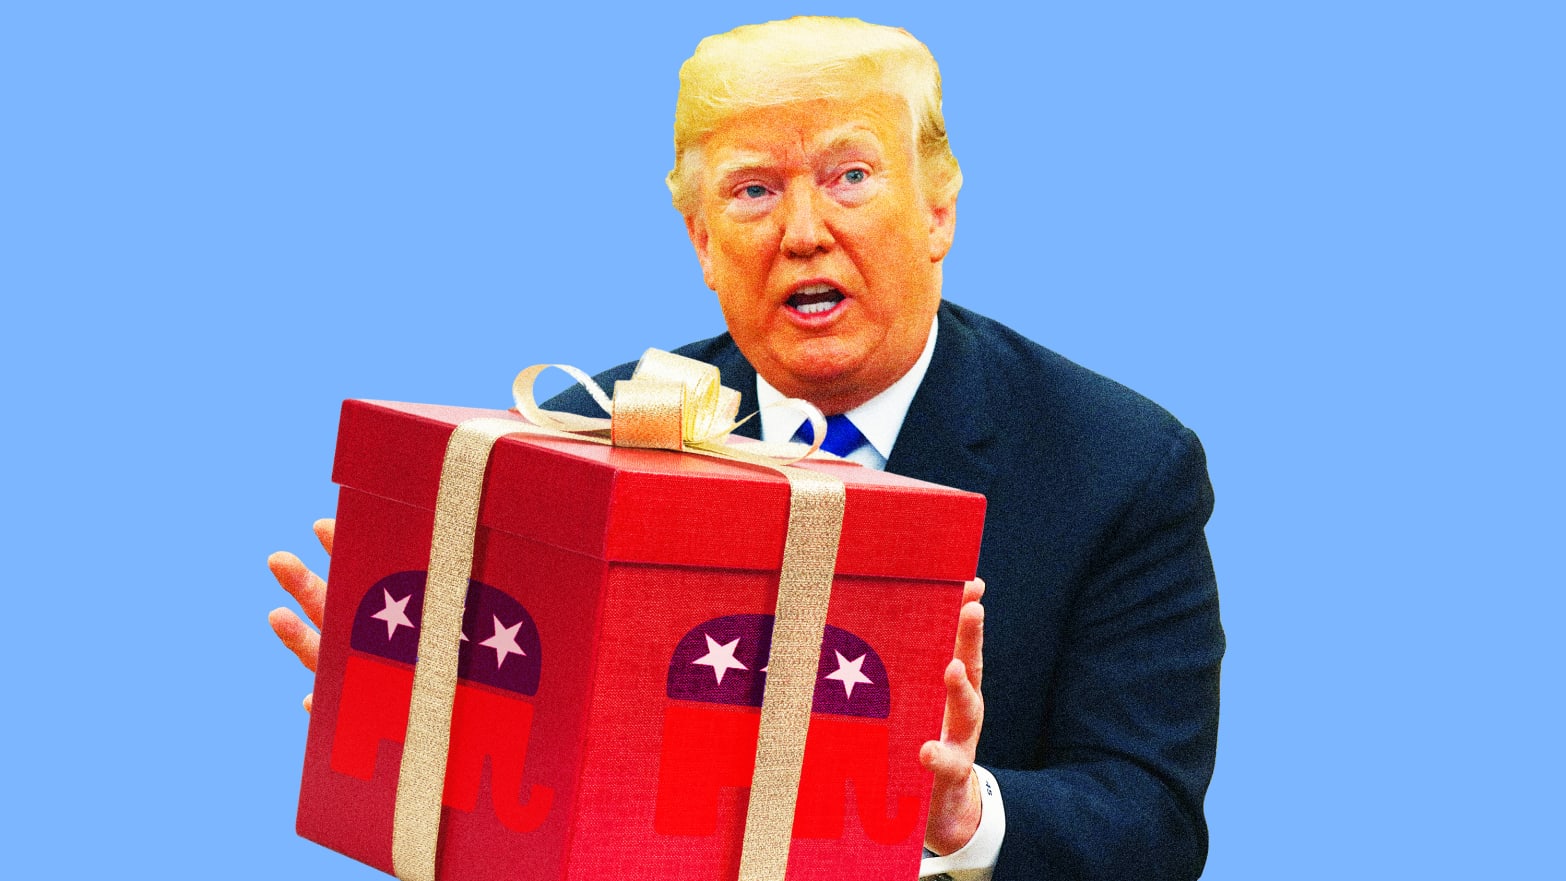 A photo illustration of former President Trump holding a holiday gift.